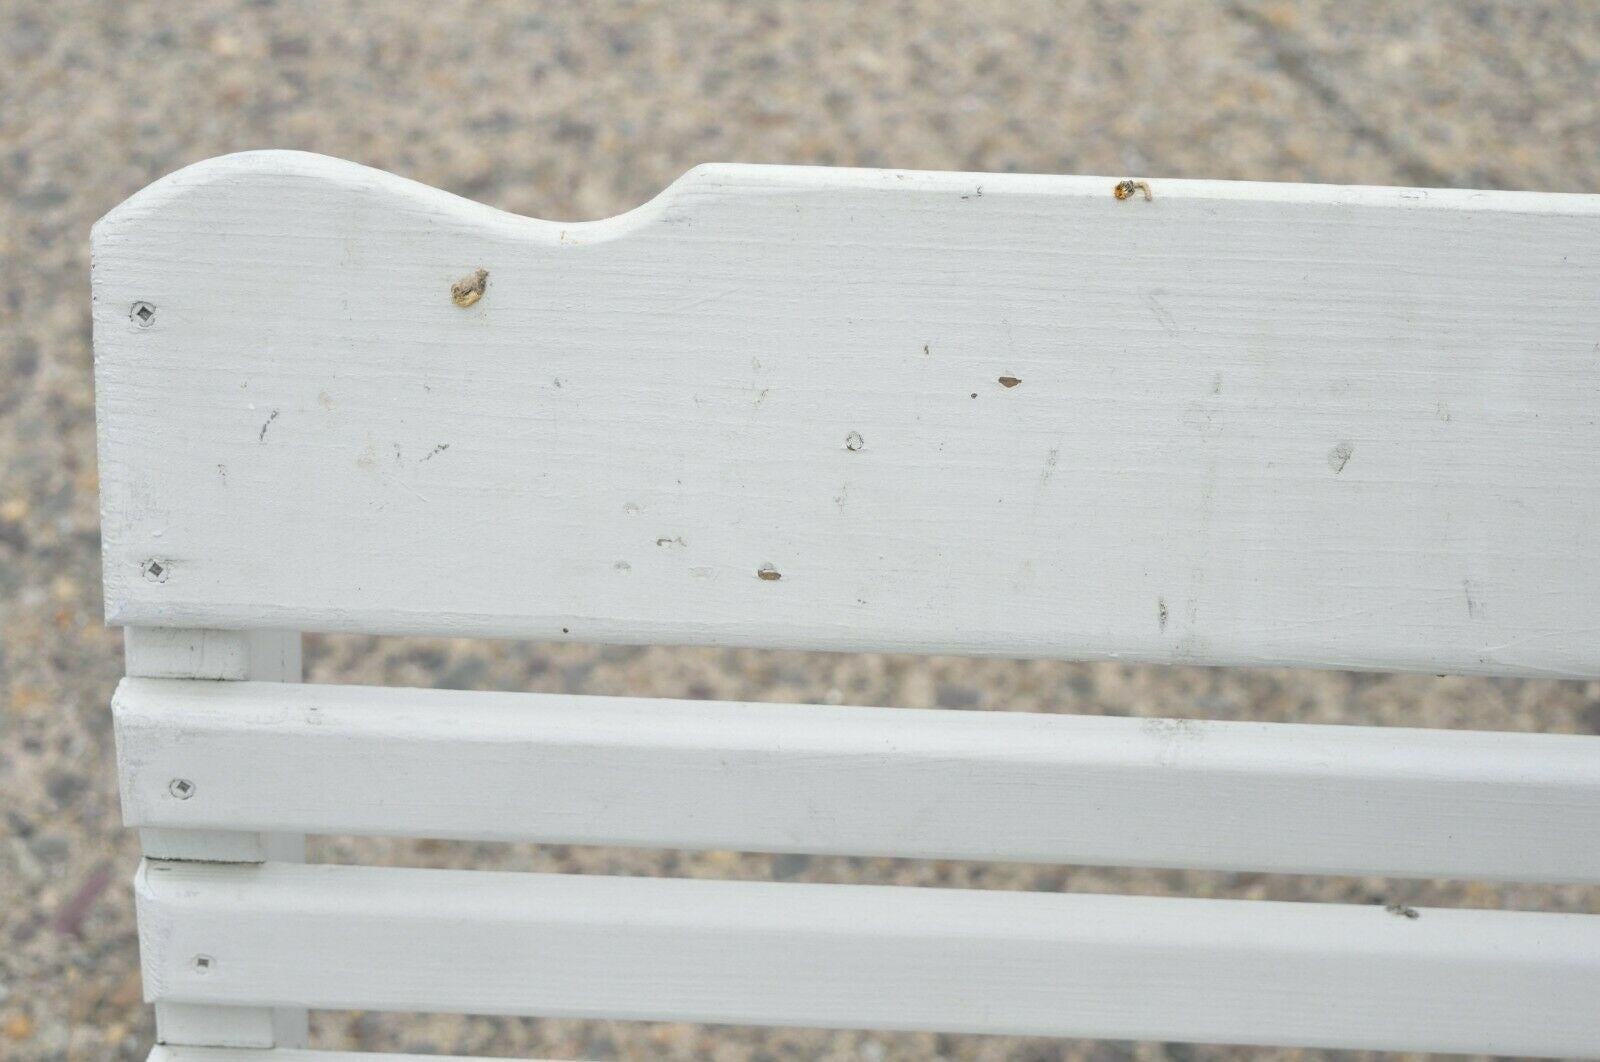 Vintage White Painted Wooden Slat Hanging Garden Patio Bench Love Seat Swing In Good Condition For Sale In Philadelphia, PA